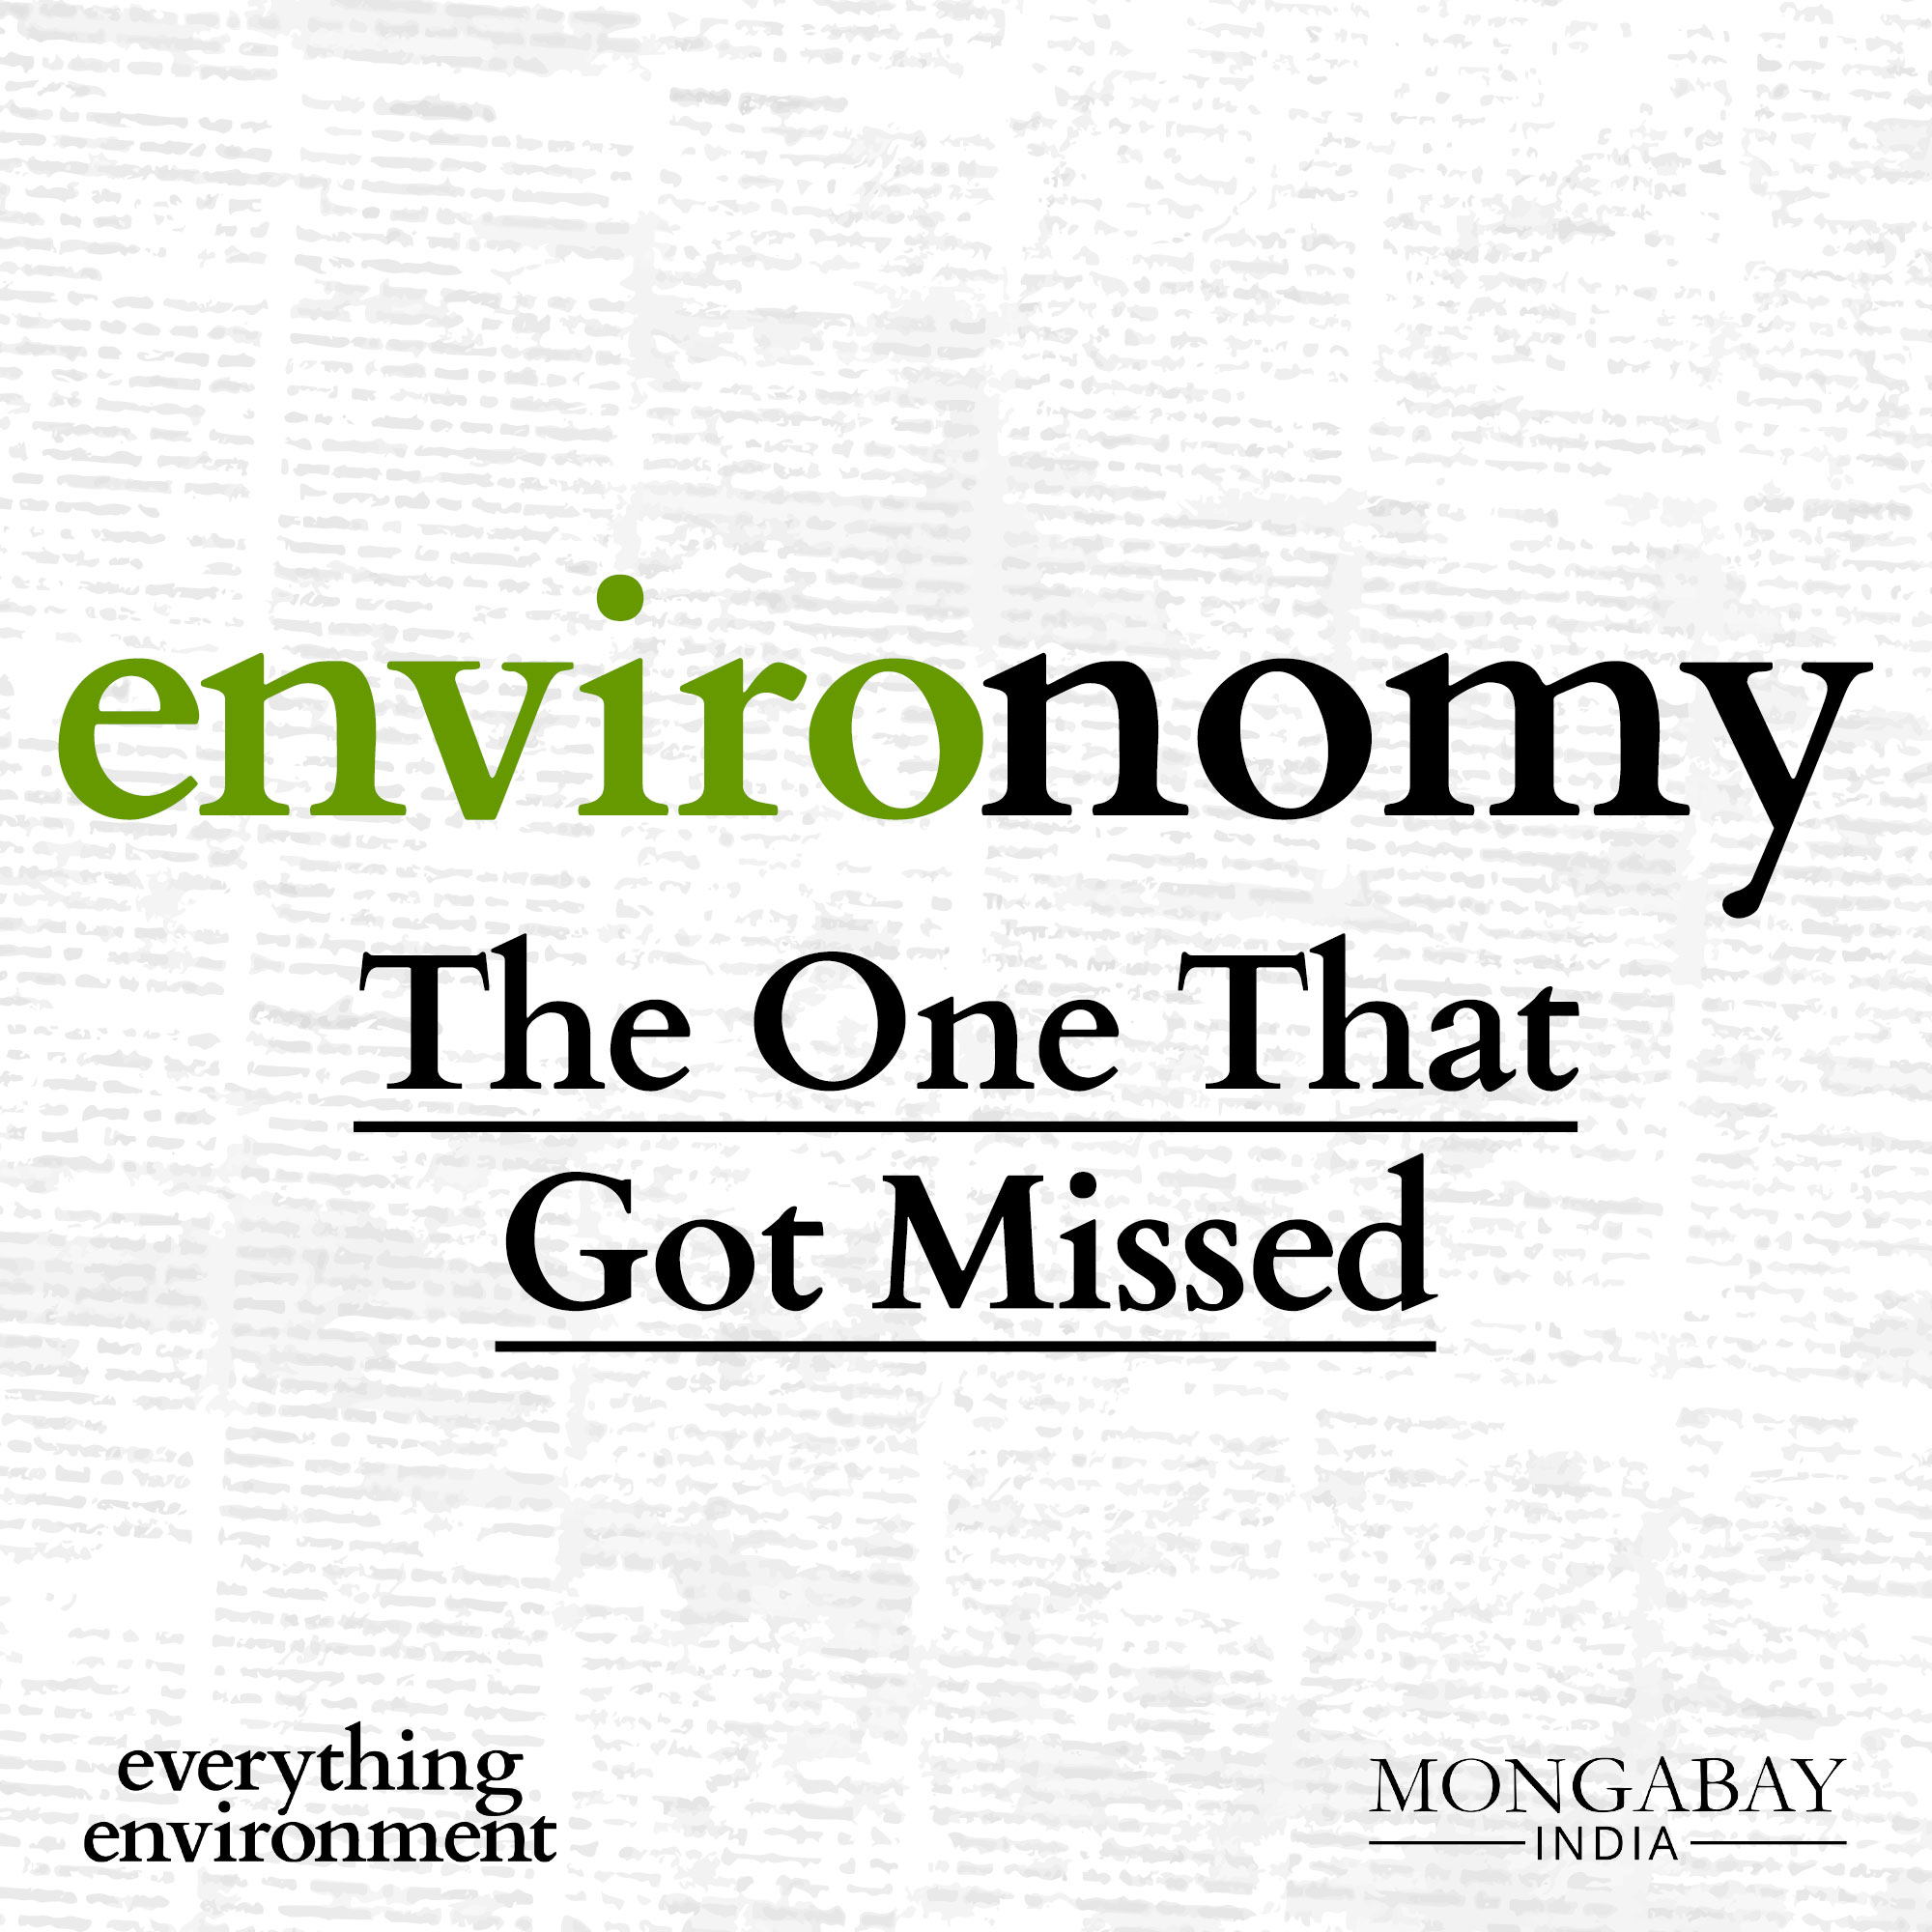 Environomy: The One That Got Missed